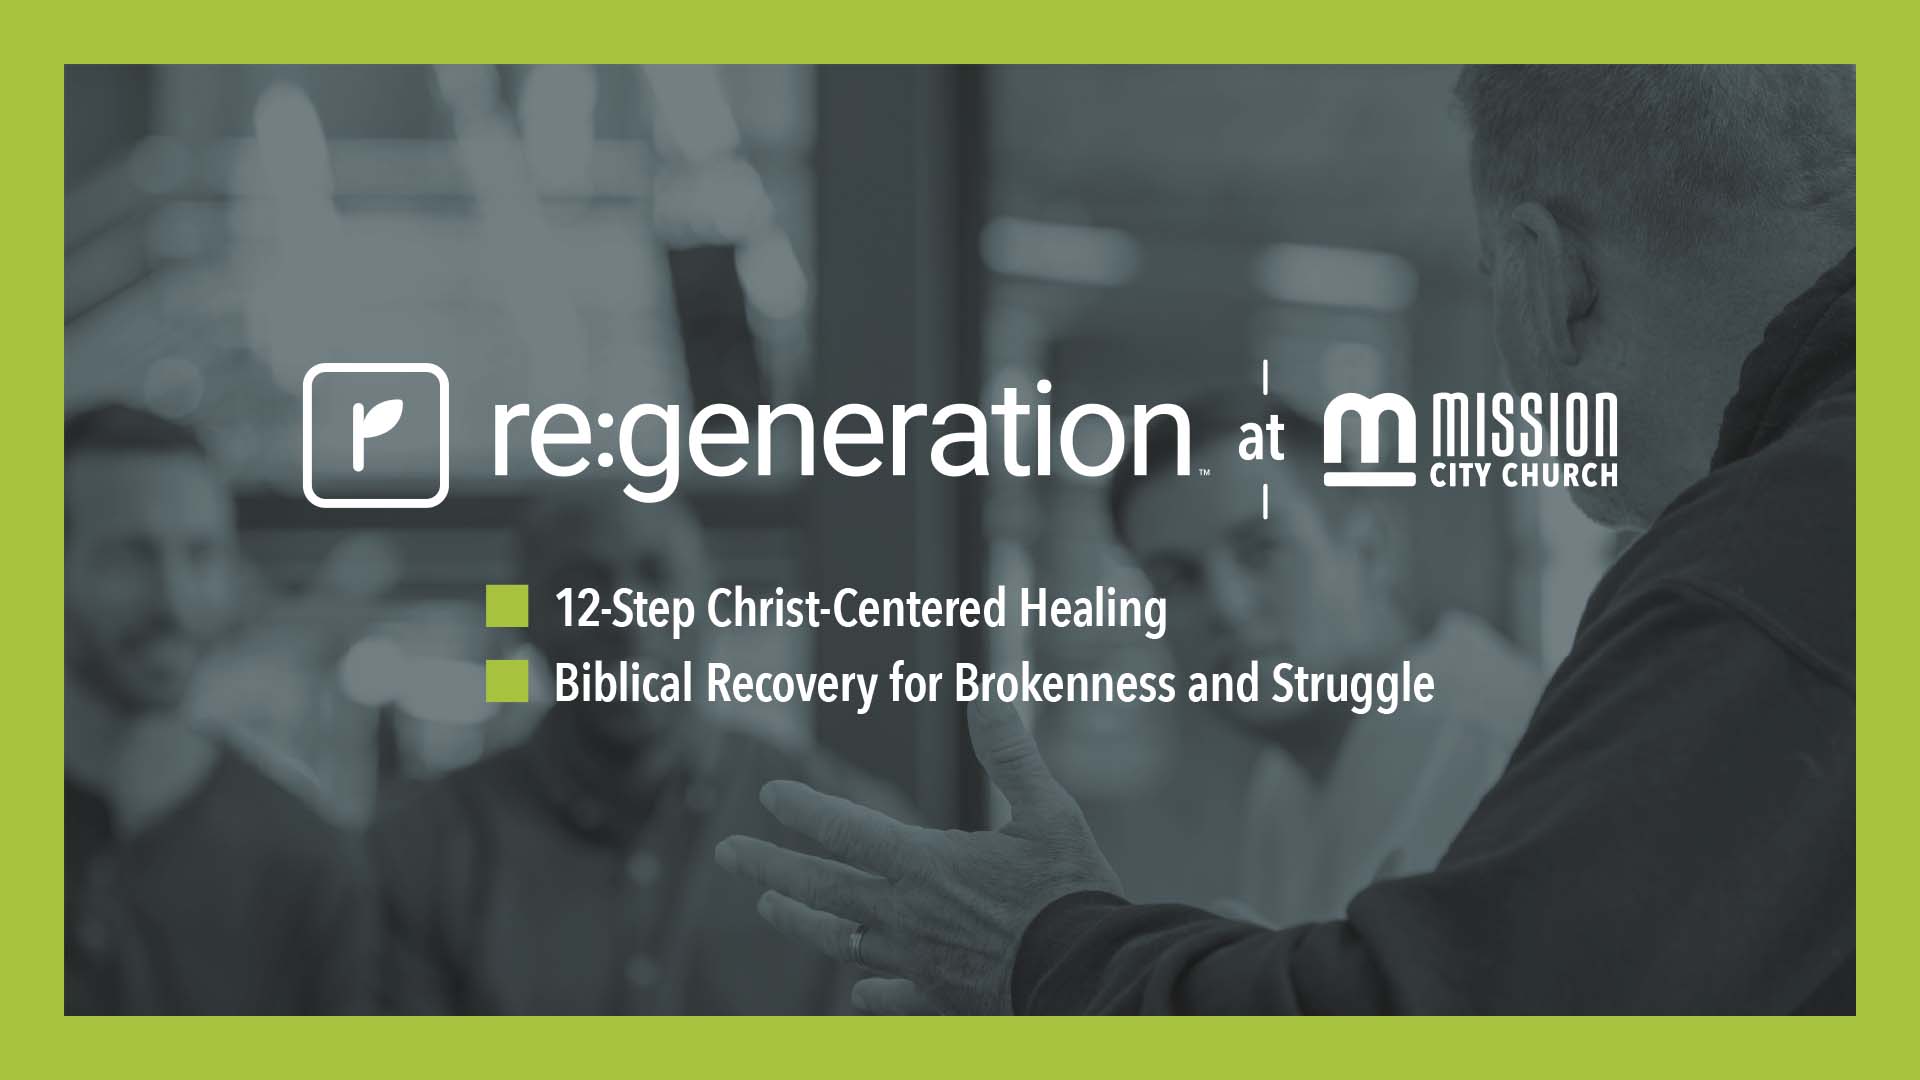 ReGeneration Recovery at Mission City in San Antonio. Biblical Healing for Brokenness and Struggles.